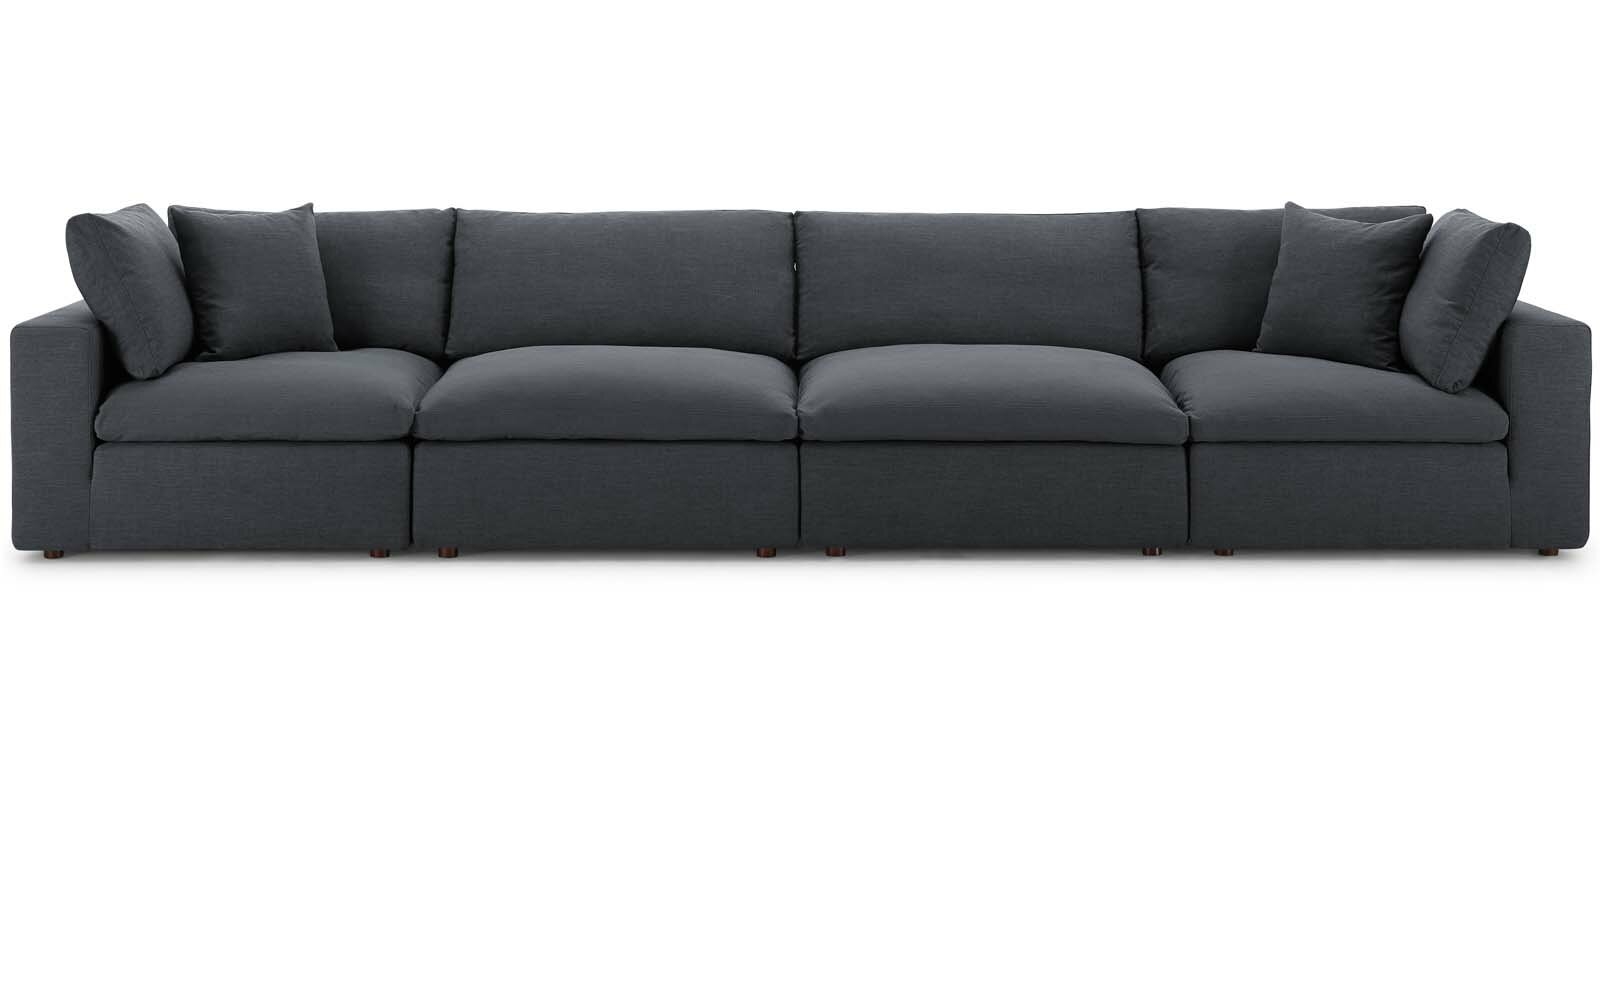 Coats Down Filled Overstuffed 6 Piece Sectional Sofa Set in gray - Image 1